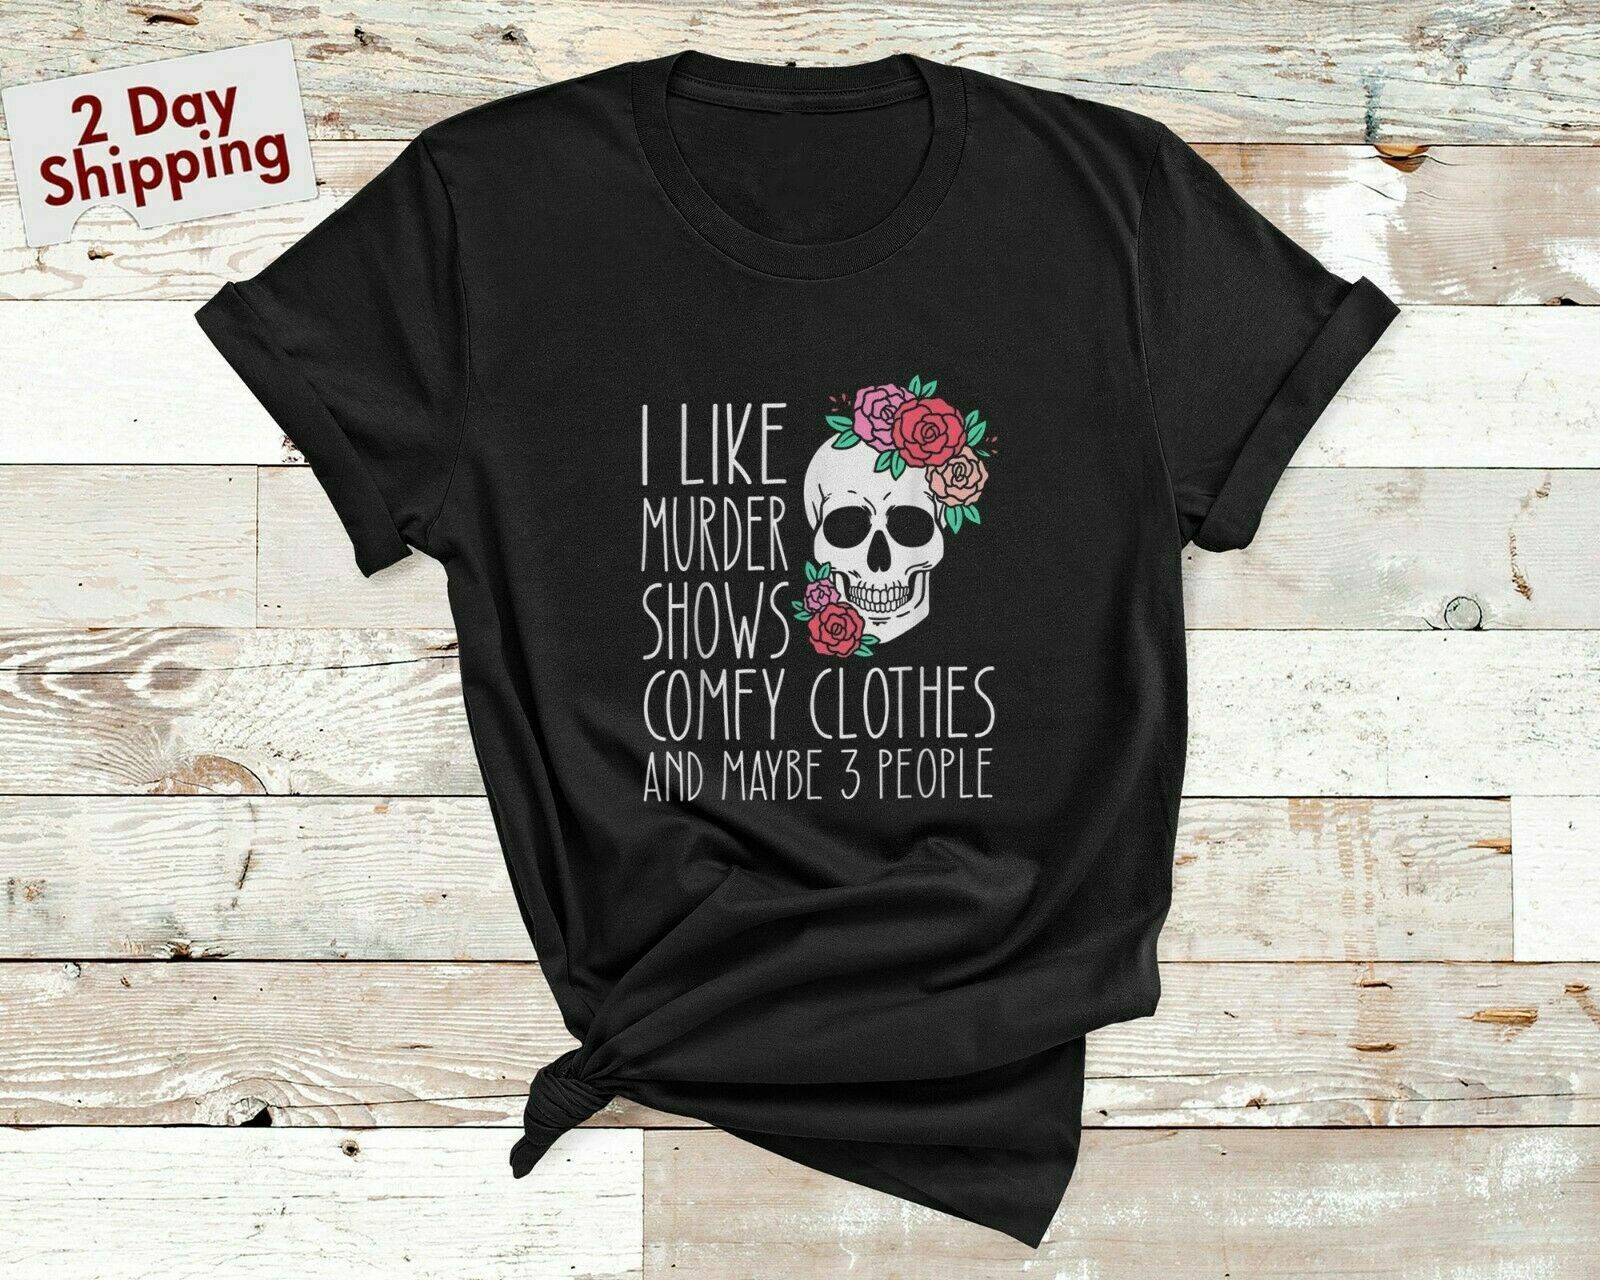 Funny I like murder shows comfy clothes and maybe 3 people T-Shirt | eBay